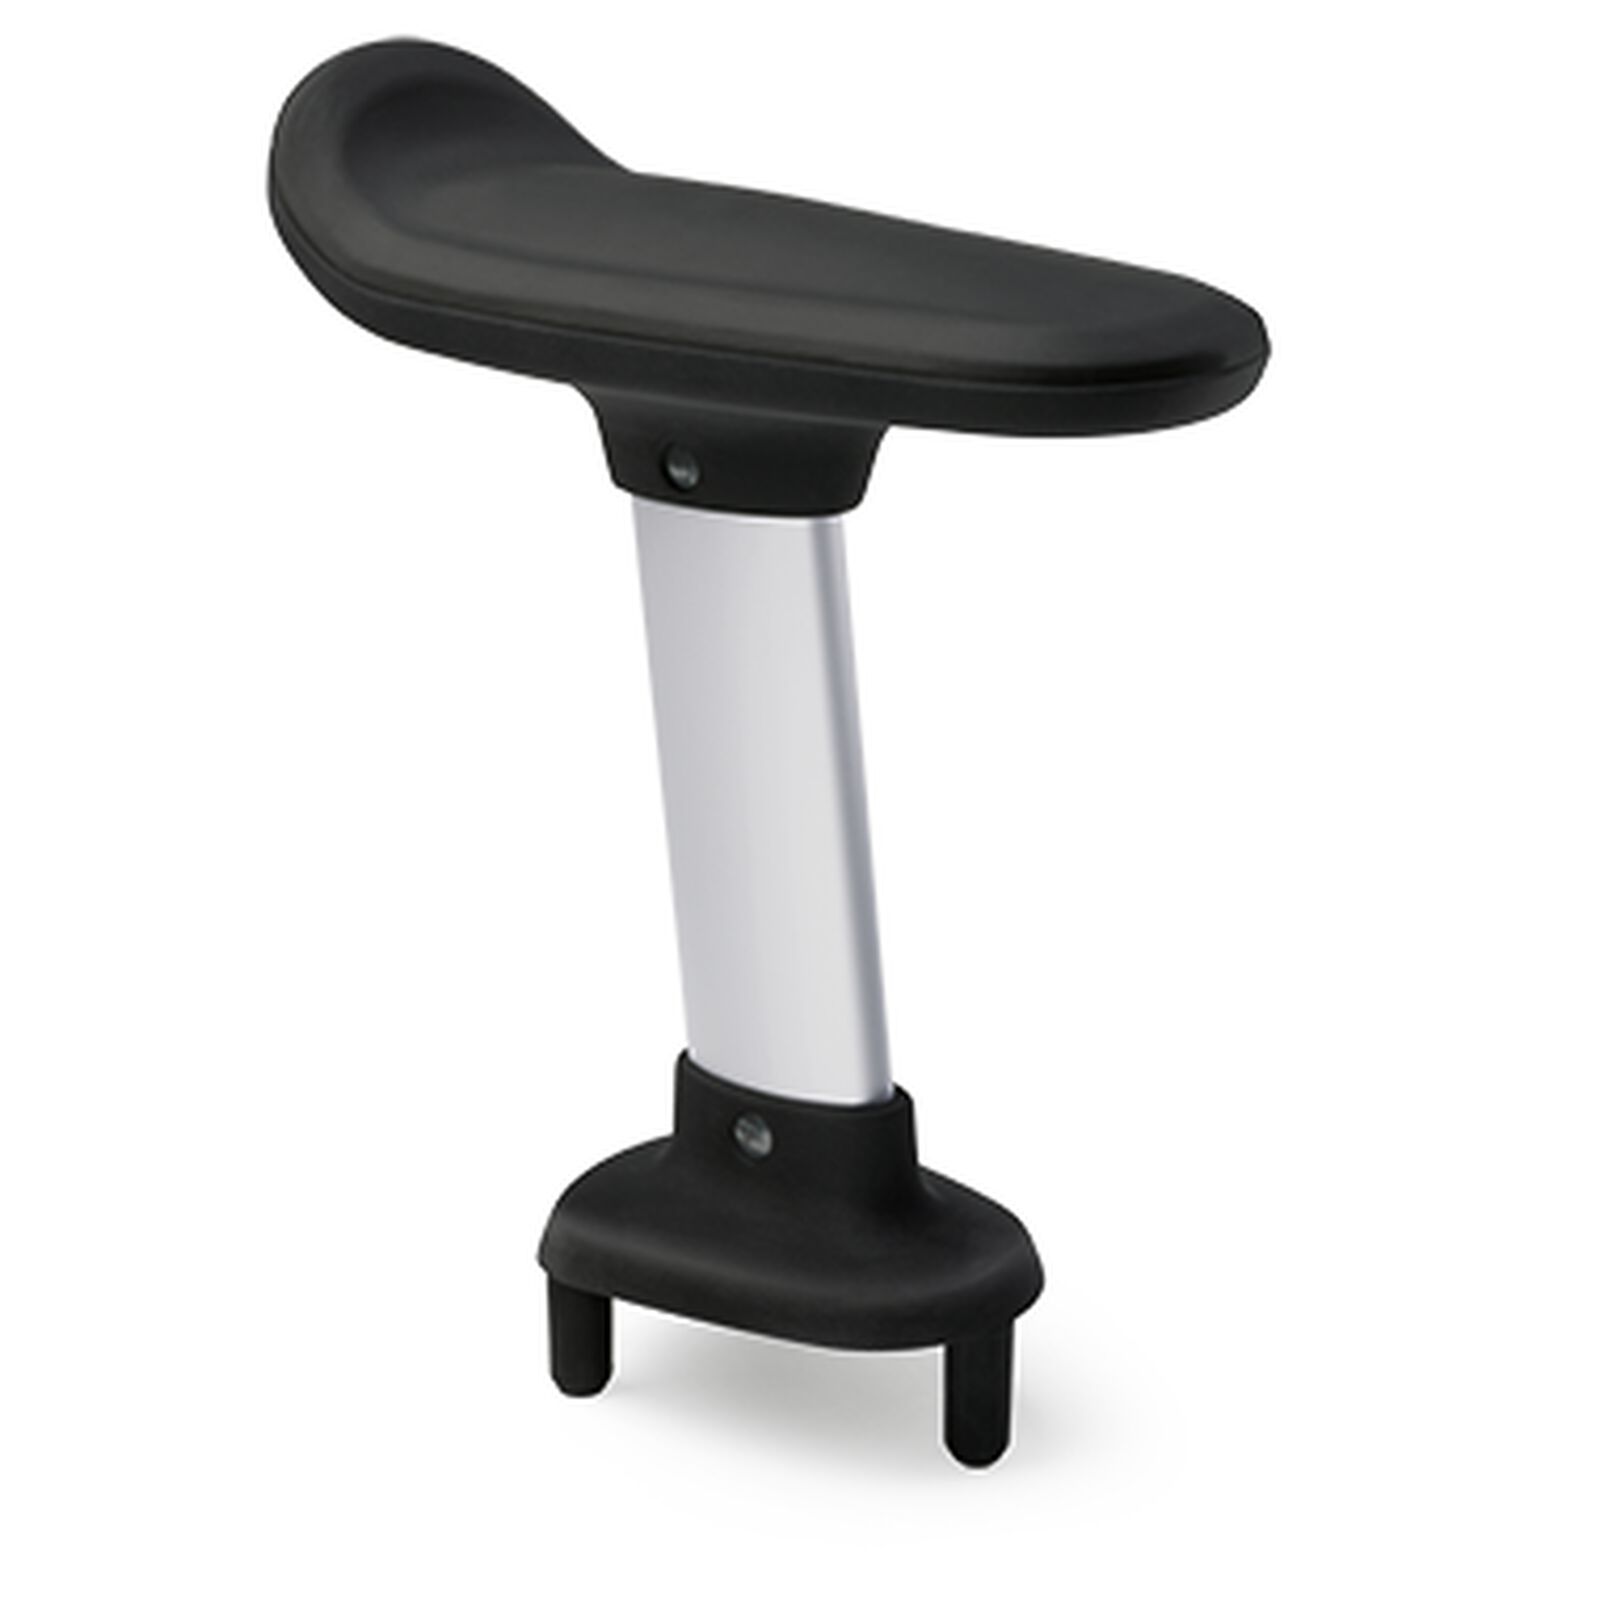 Bugaboo seat for comfort wheeled board - View 1